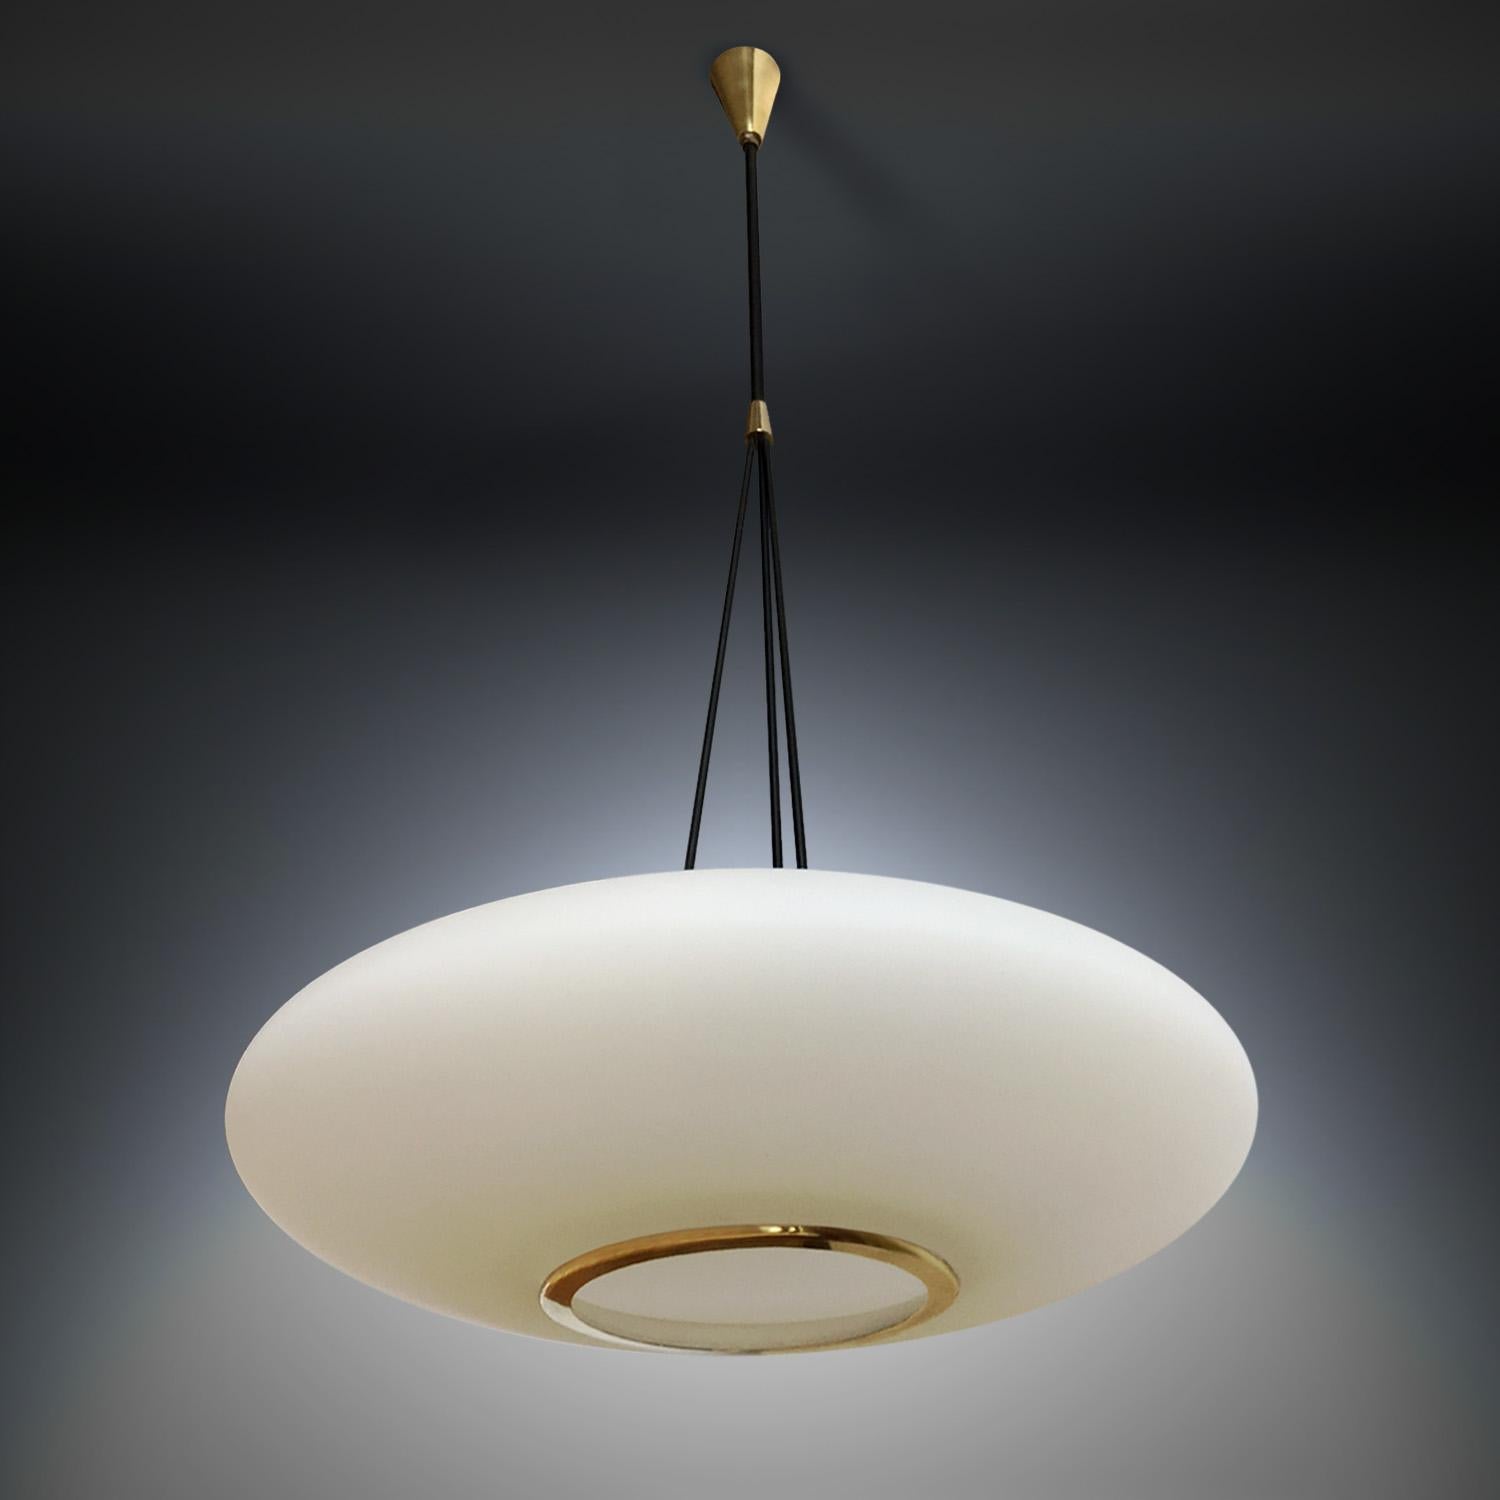 Superb Italian light pendant manufactured by Stilnovo in the 1950s.
The oval brushed satin glass diffuser is suspended from enameled metal arms and finished with original brass details.
It's in very good conditions of the period, with slight signs